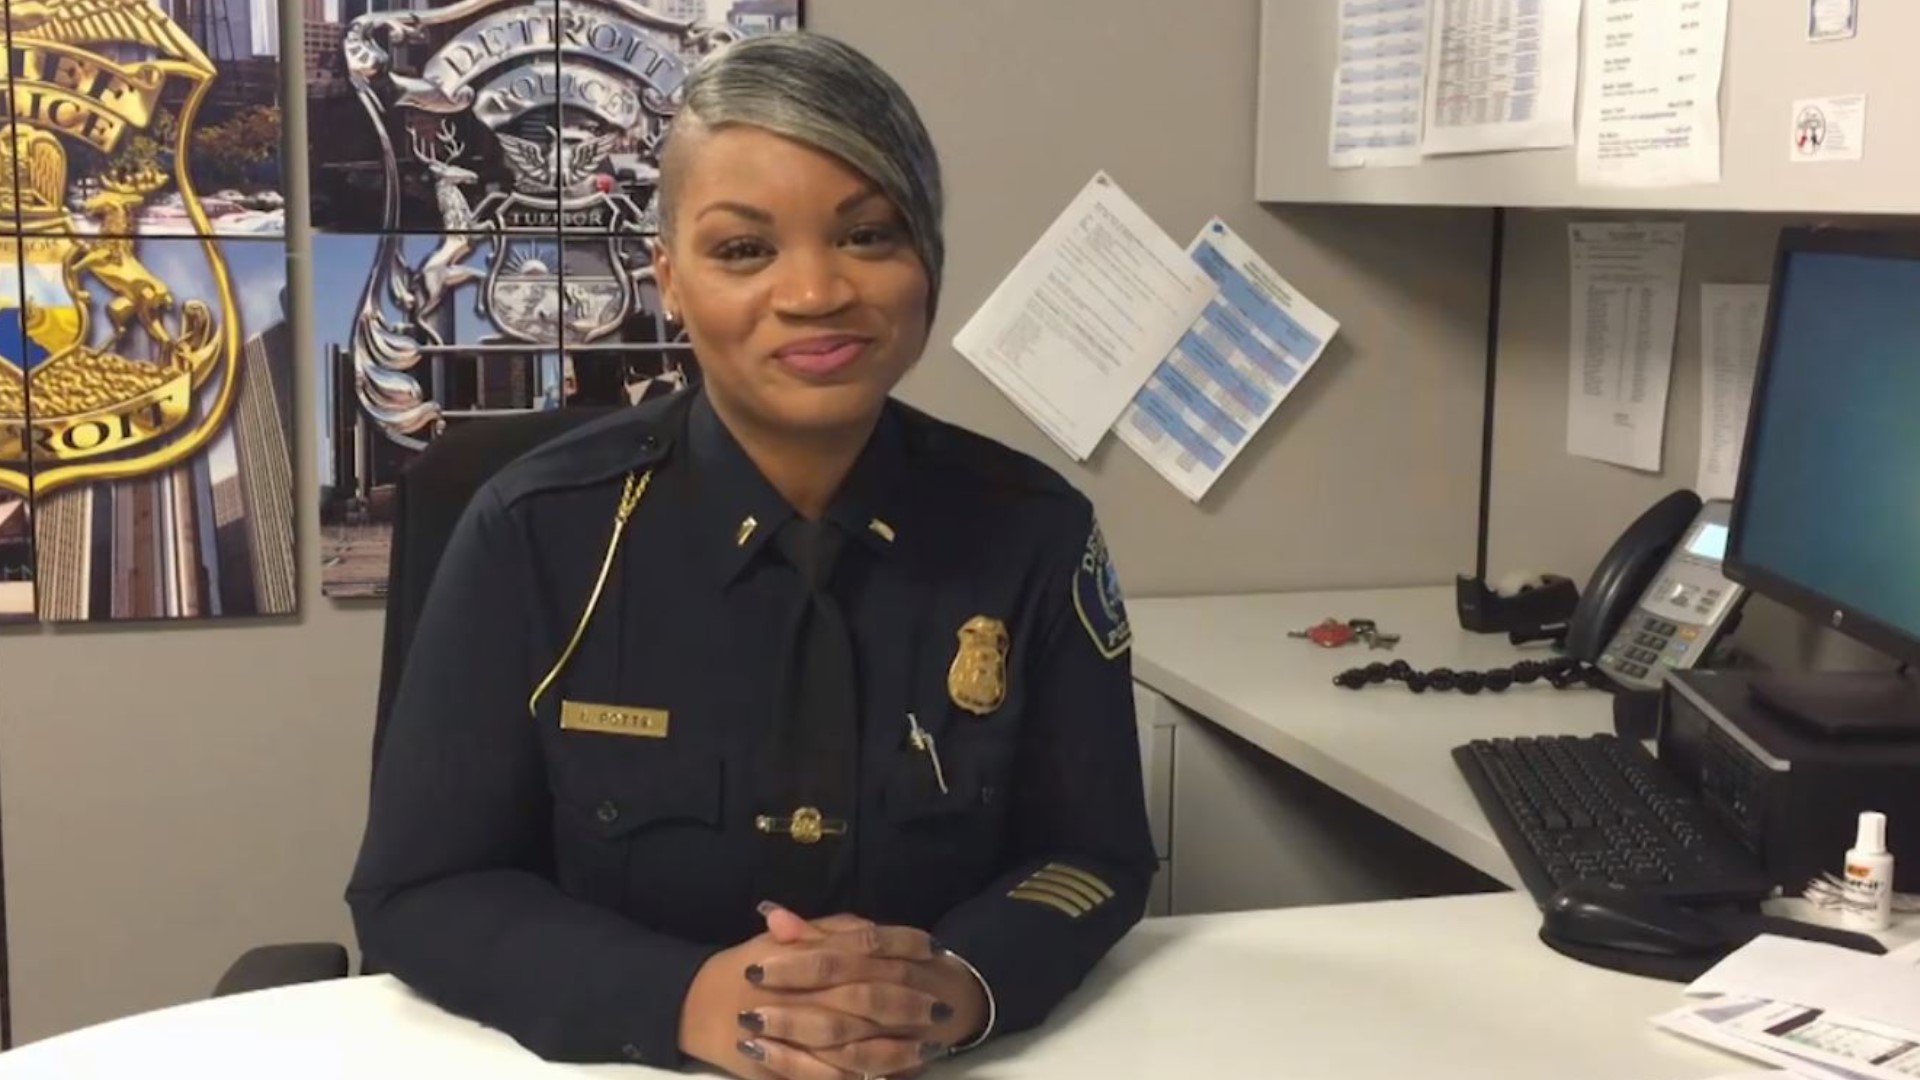 Columbus Assistant Police Chief LaShanna Potts comes from the Detroit Police Department and has 20 years of experience in law enforcement.